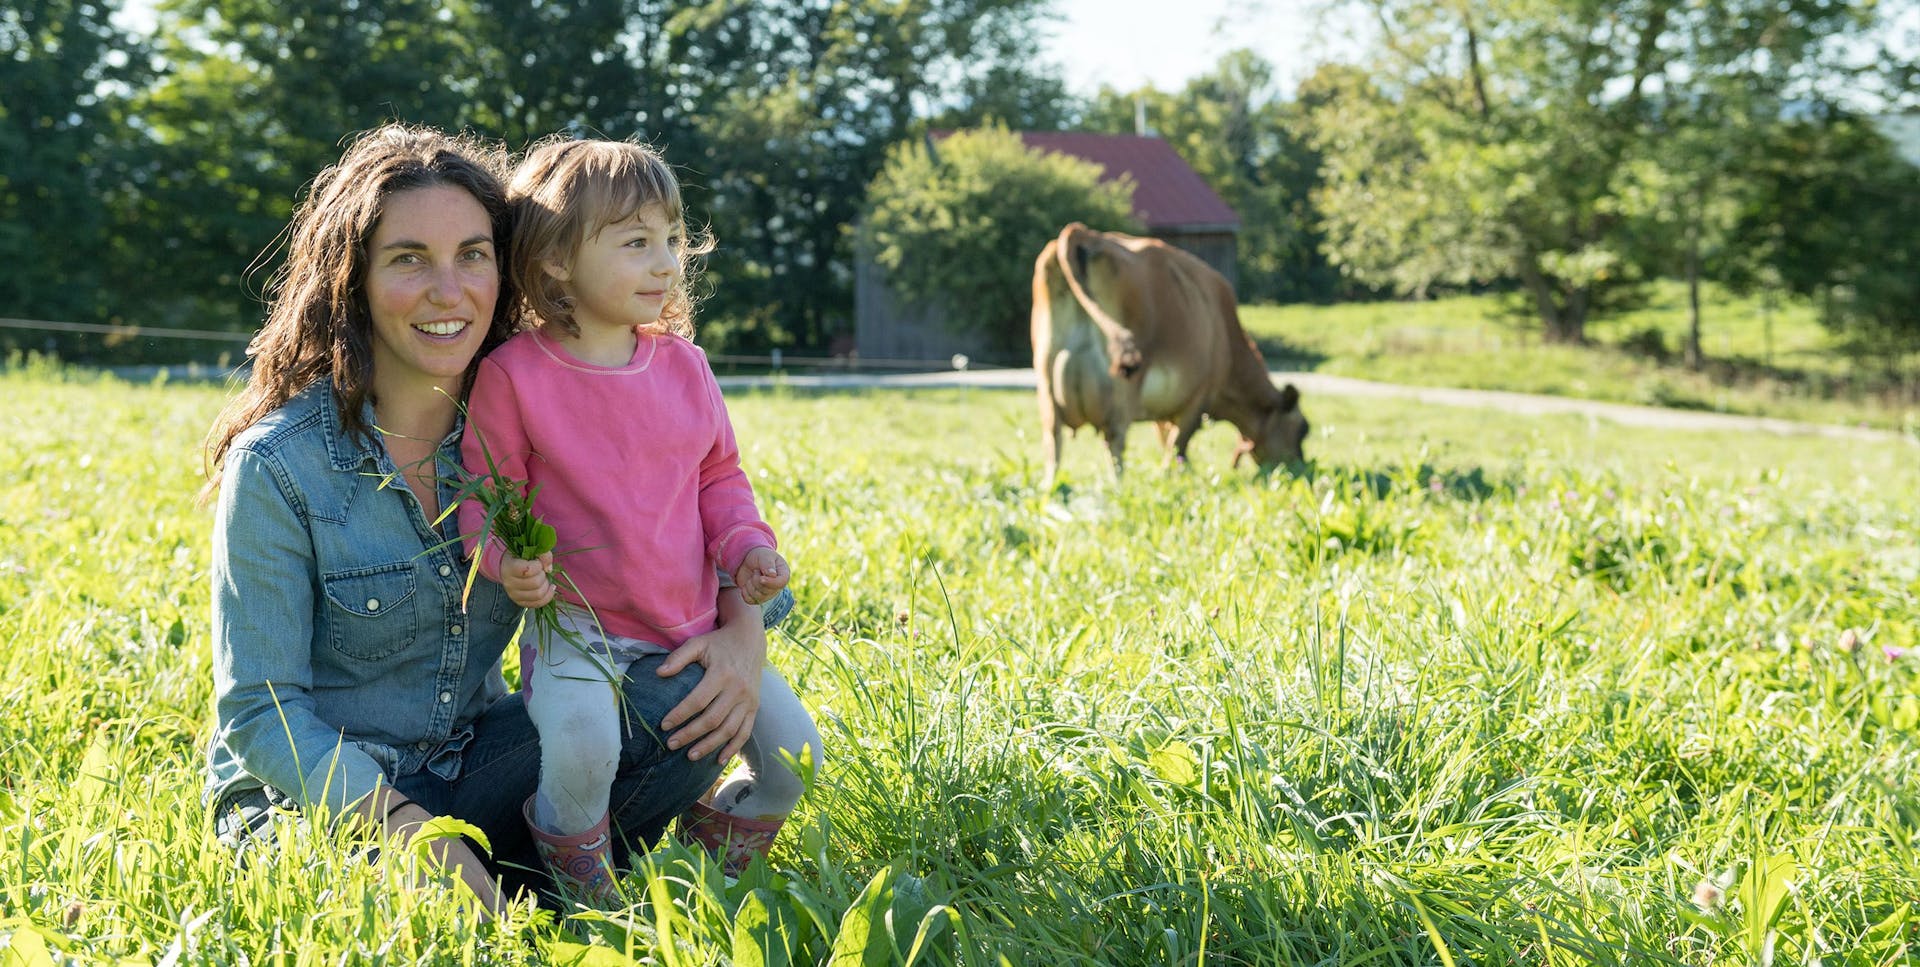 A farmer and her daughter standing in a field with a cow.